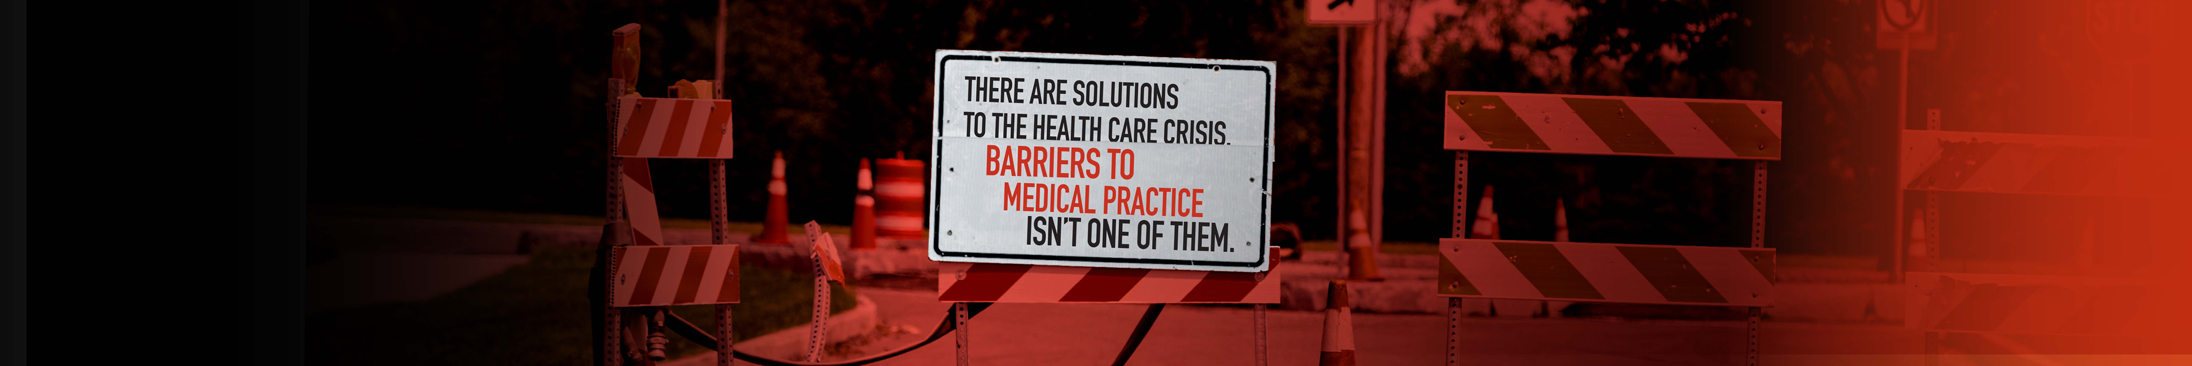 there are solutions to the health care crisis